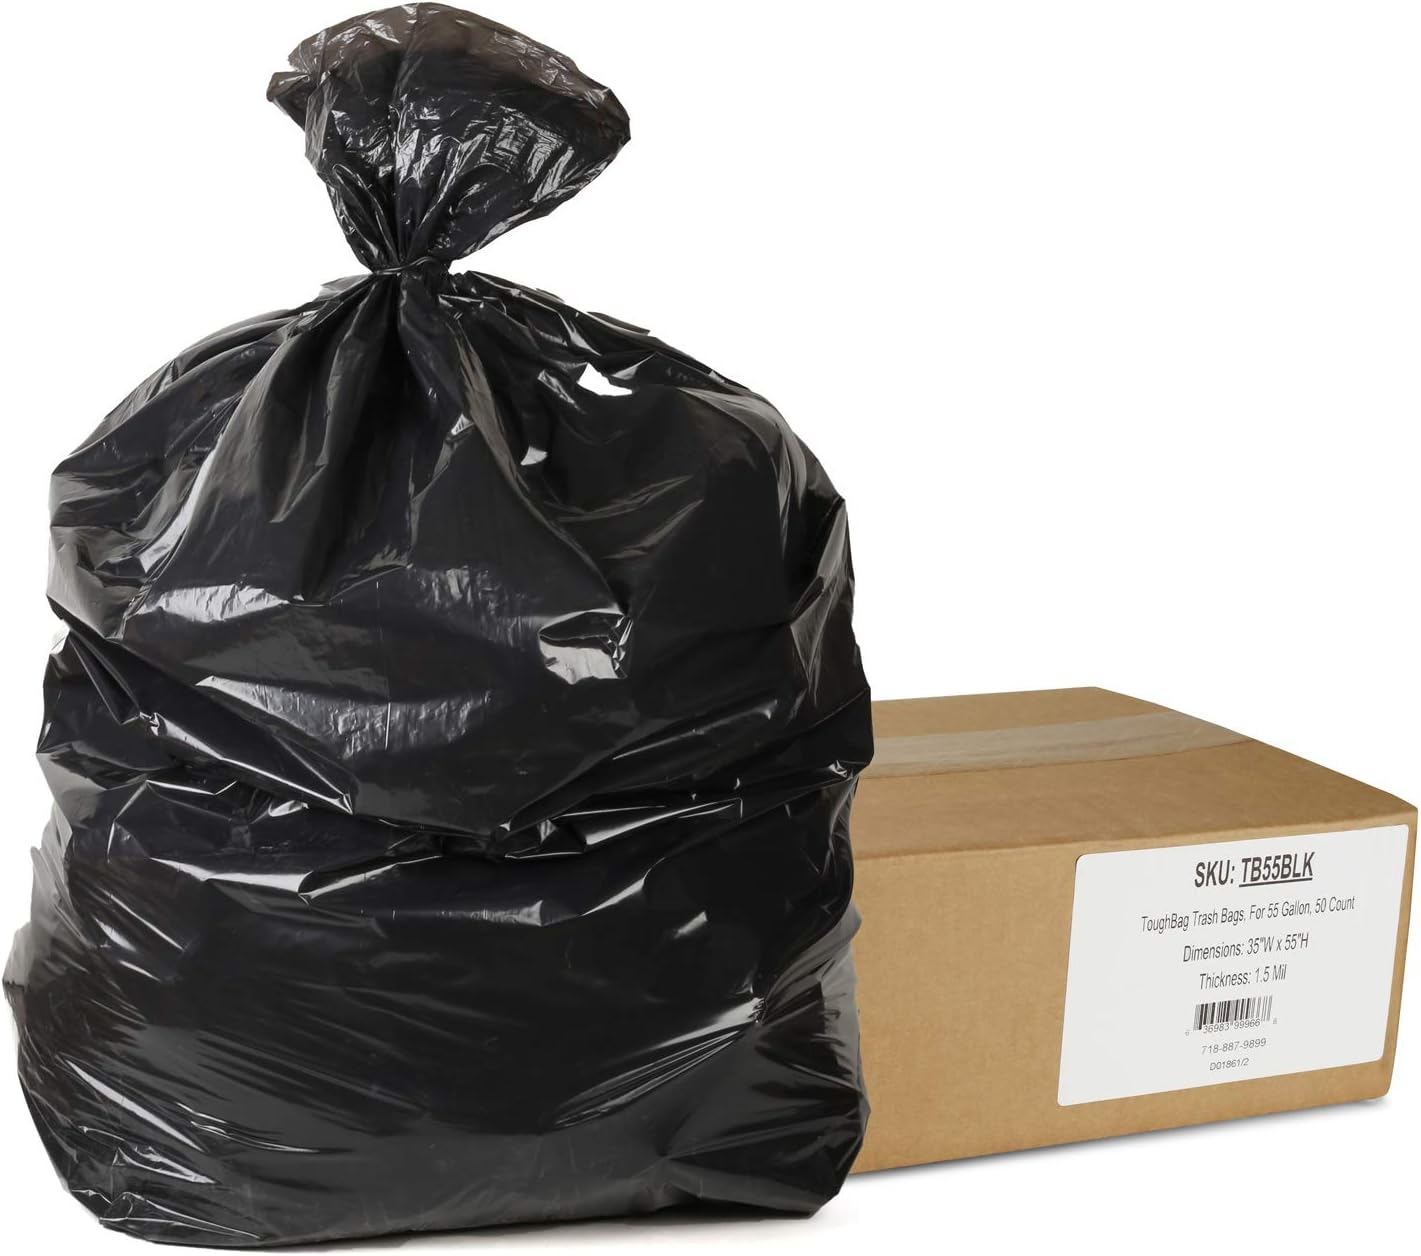 Looking to Buy The Best Trash Bags: Choose From These Top Rated 60-Gallon Options